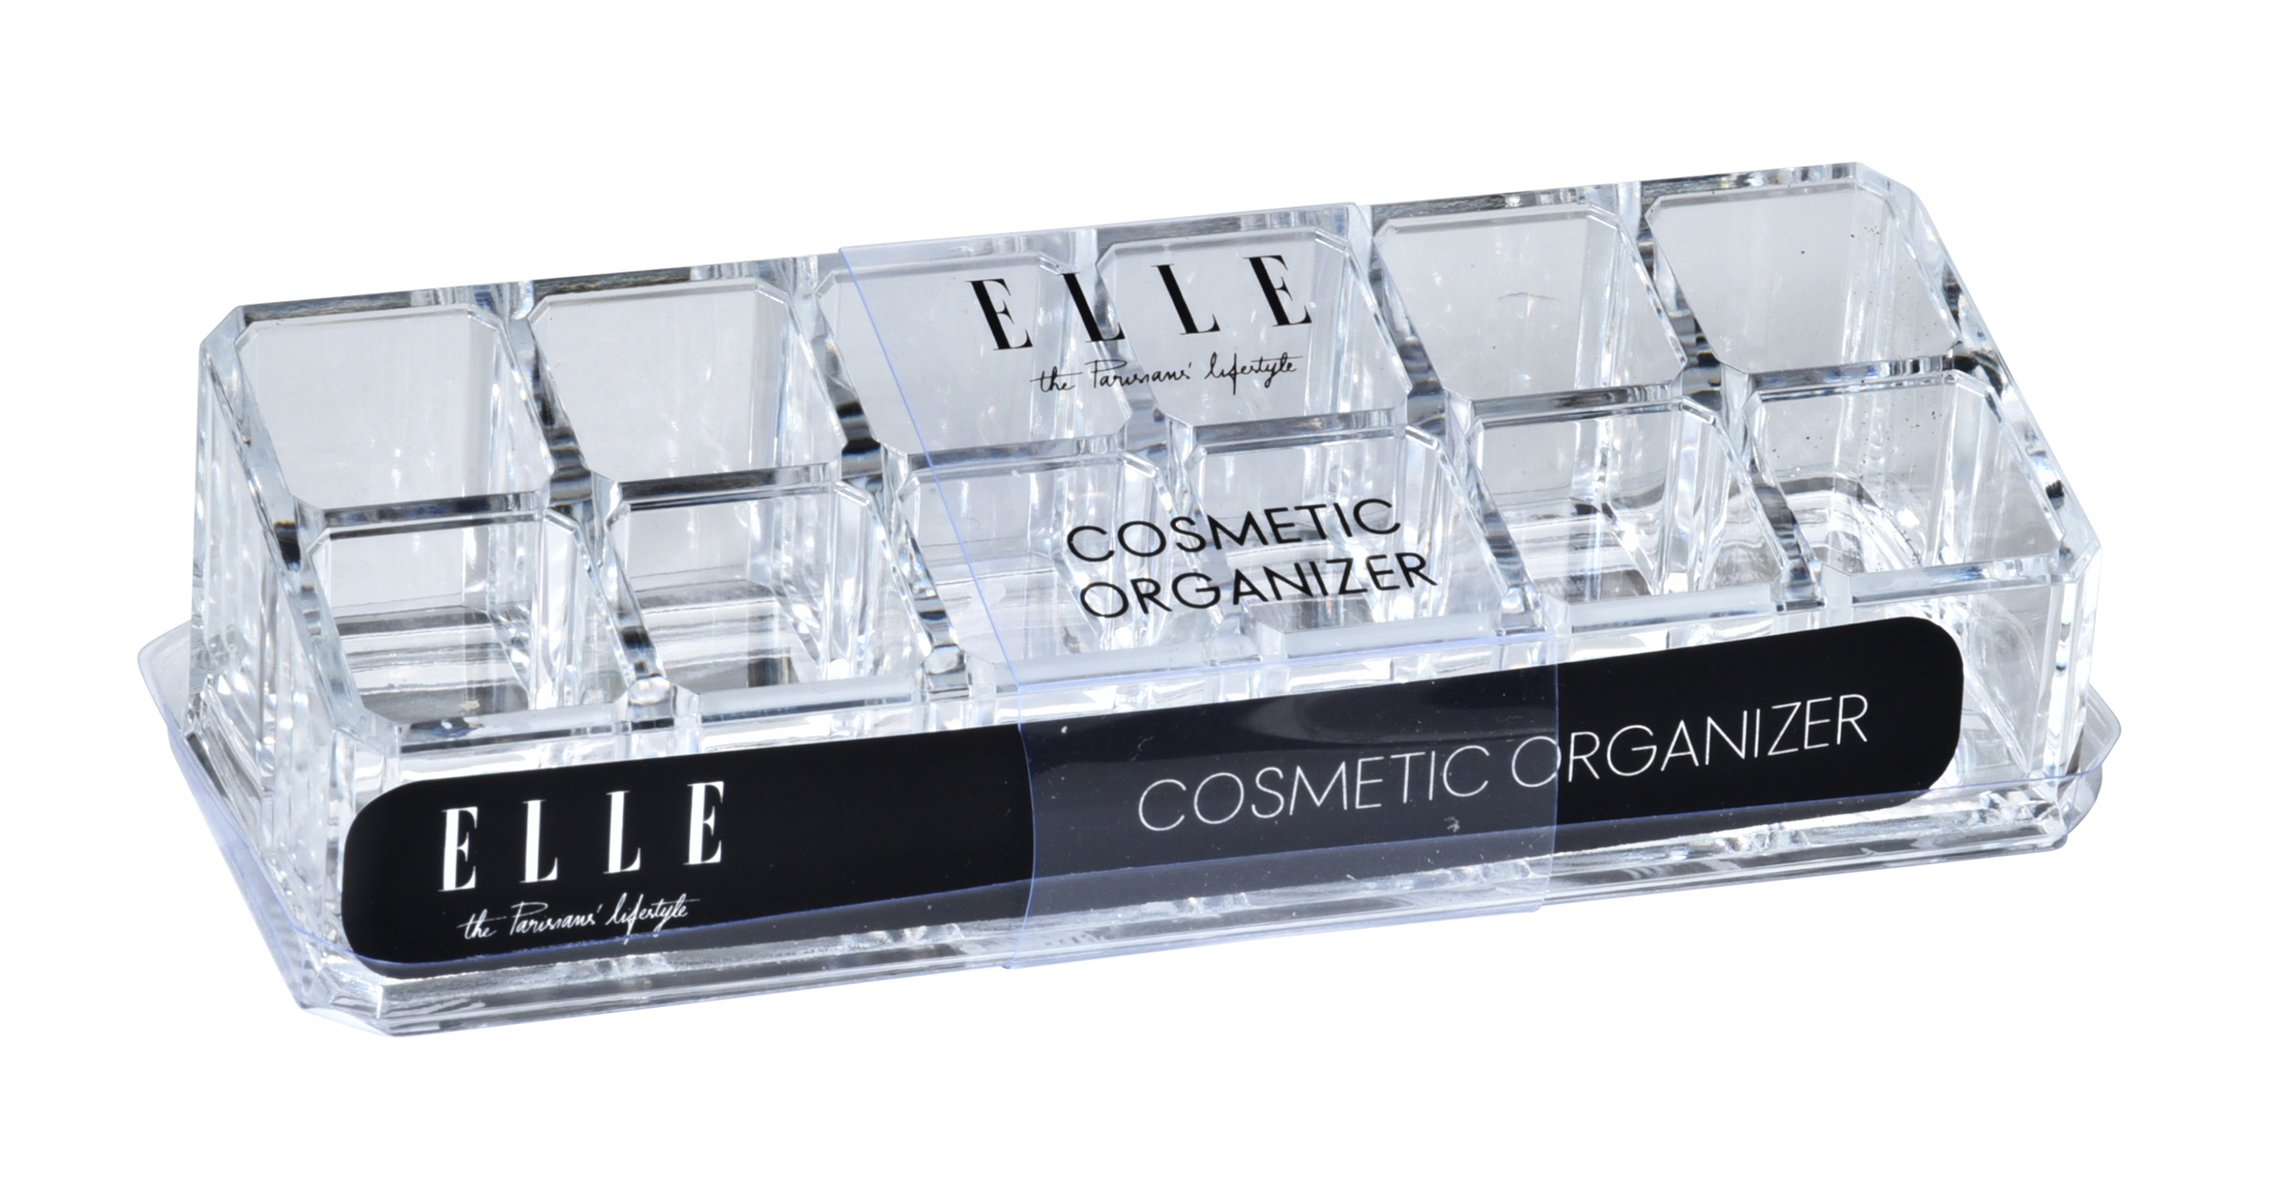 ELLE The Parisians Lifestyle Collection Clear Acrylic LIPSTICK Organizers